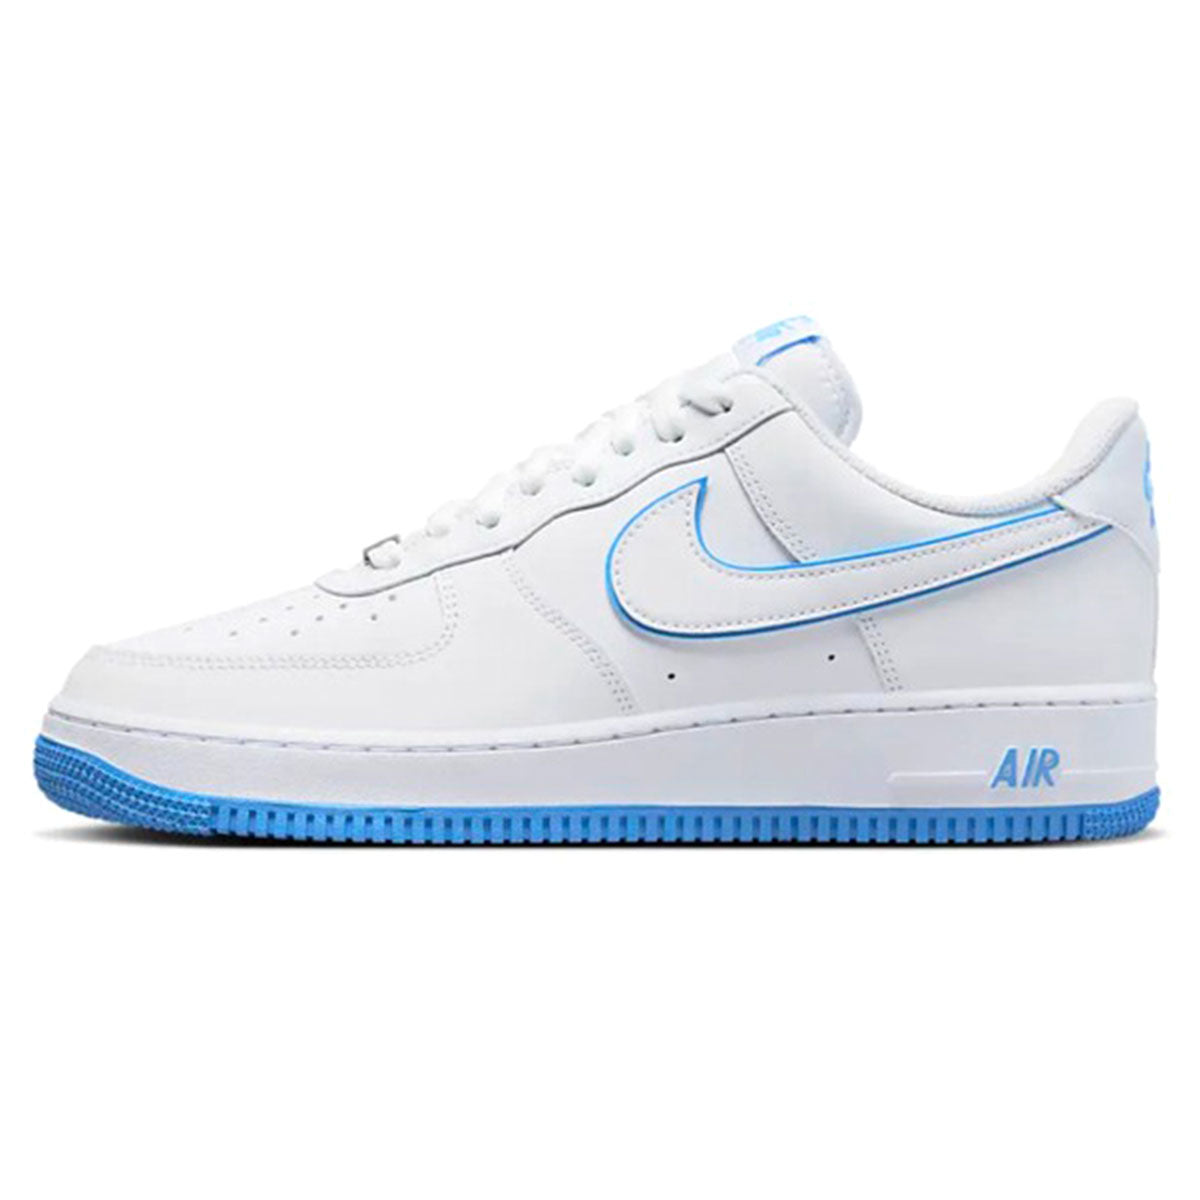 NIKE Air Force 1 Low White and University Blue ナイキ エア フォース 1 ロー 